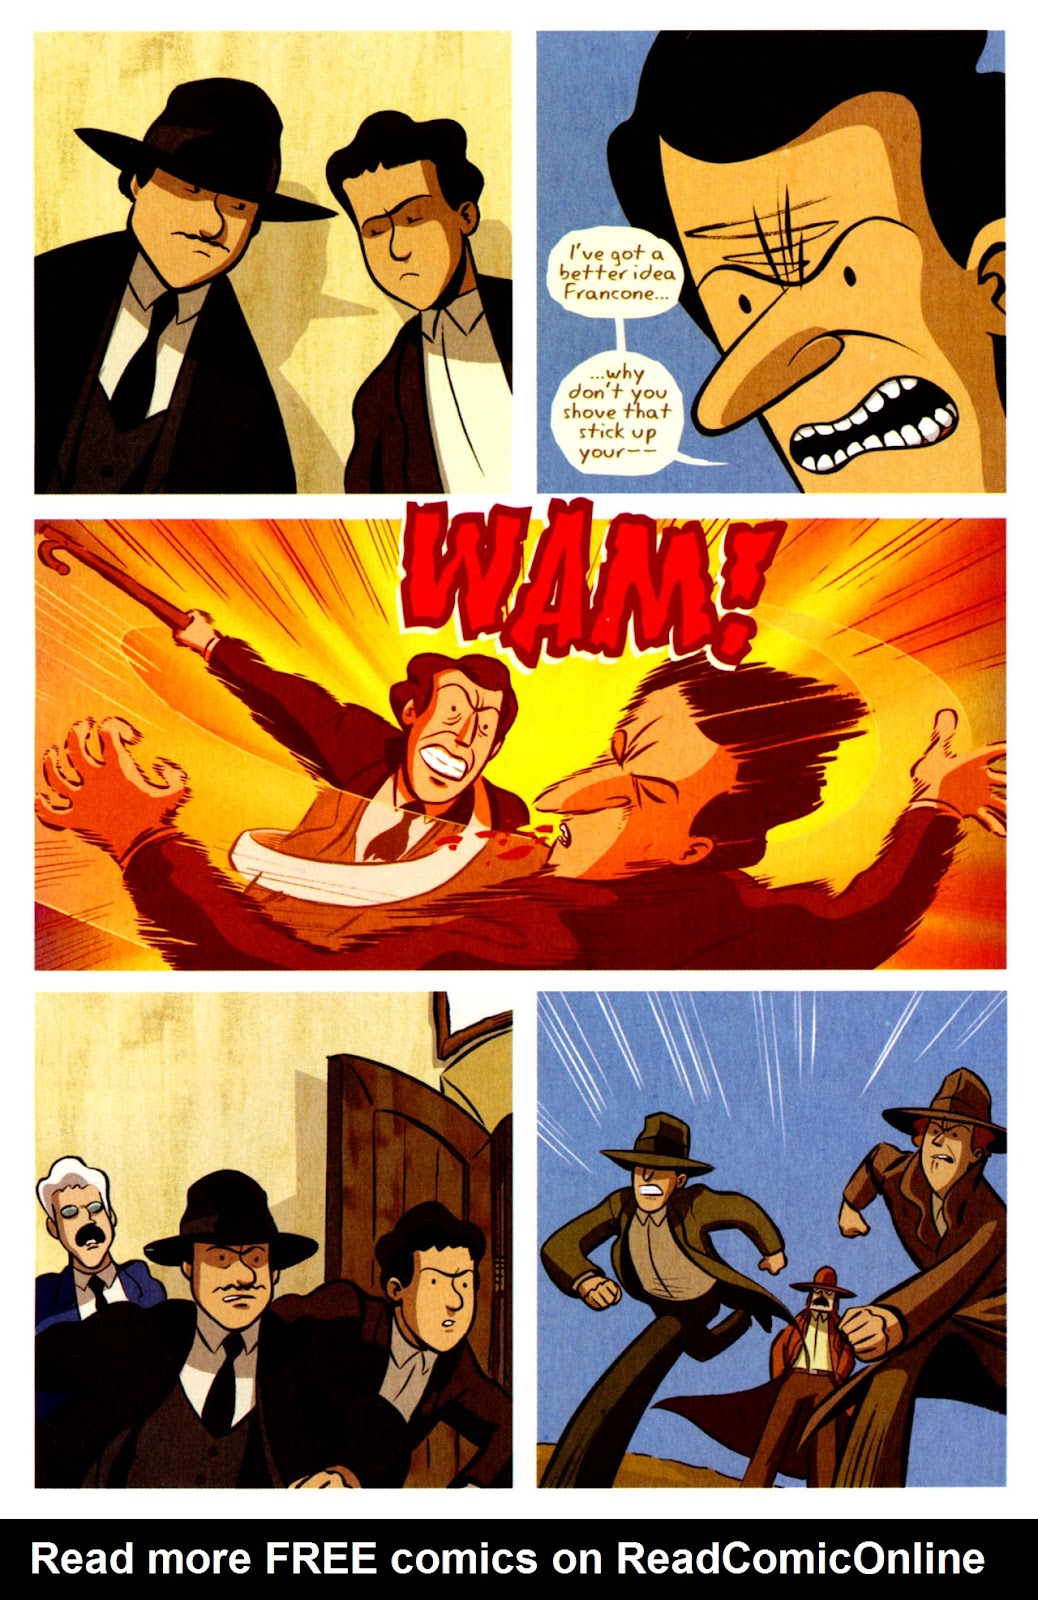 Parade (with fireworks) issue 1 - Page 24